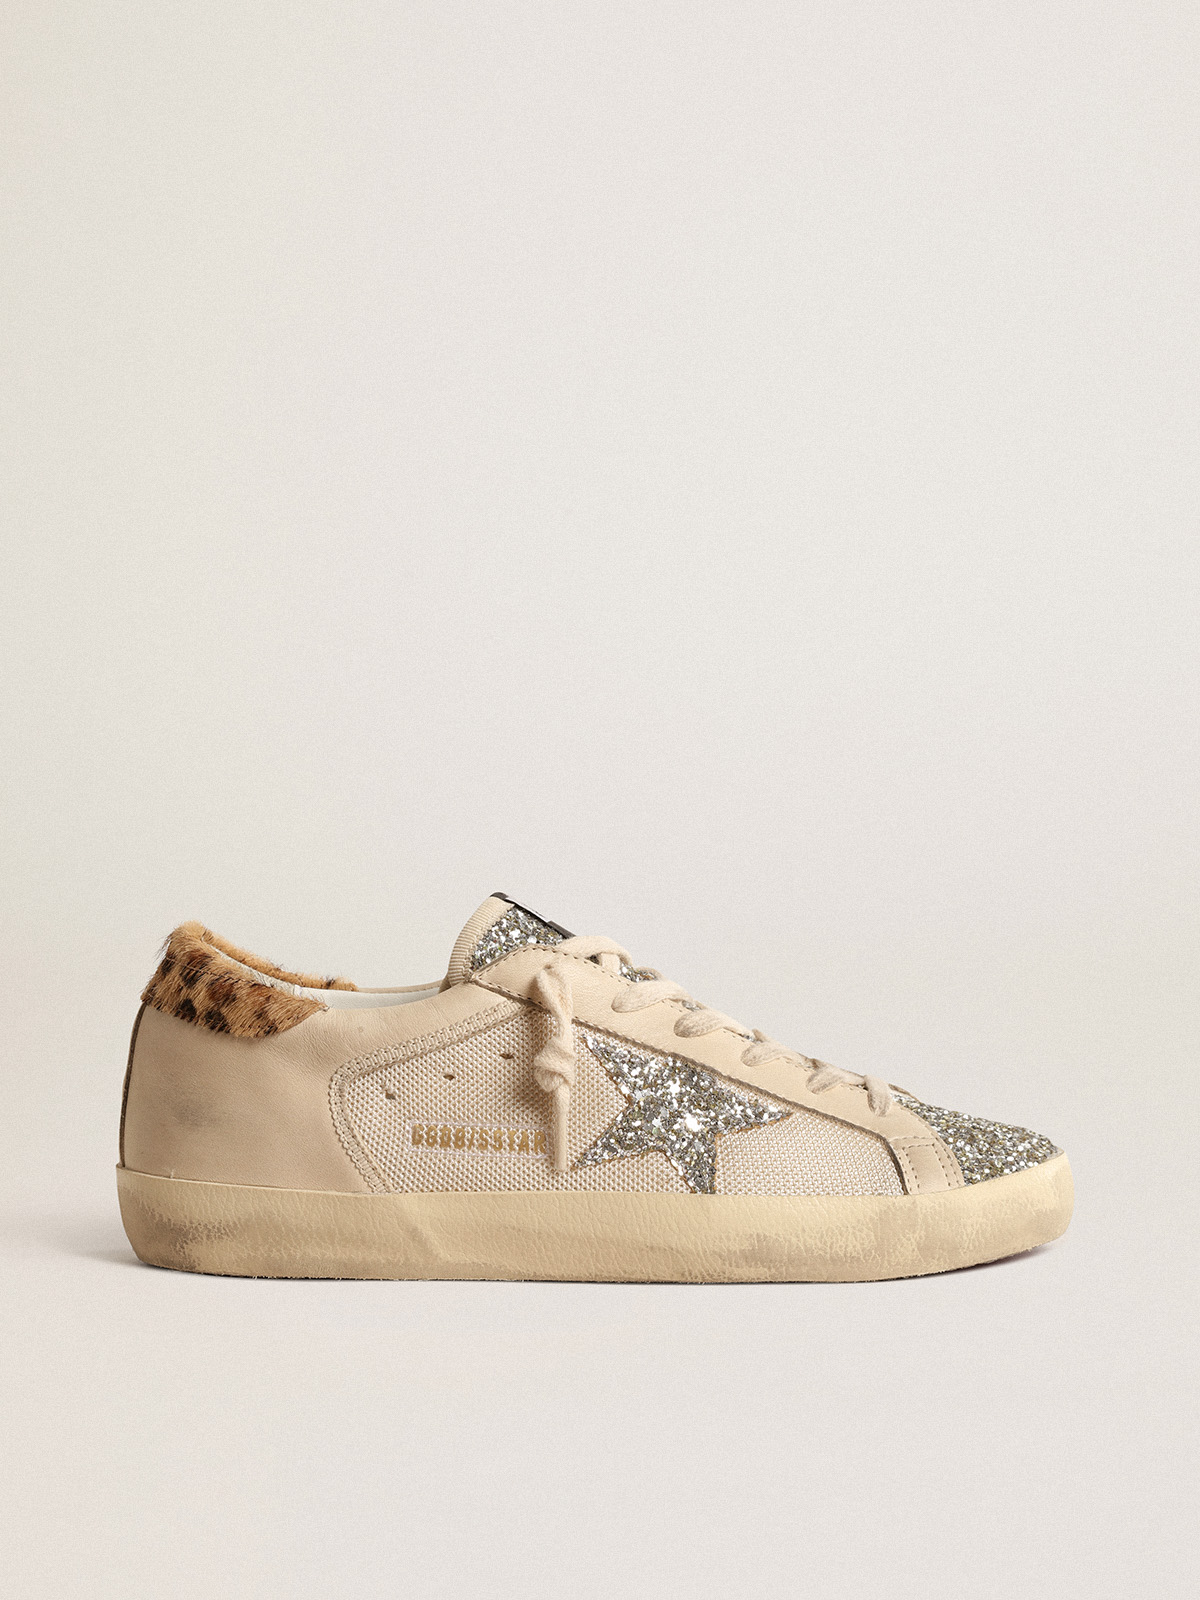 Super-Star in cream mesh with glitter star and leopard heel tab